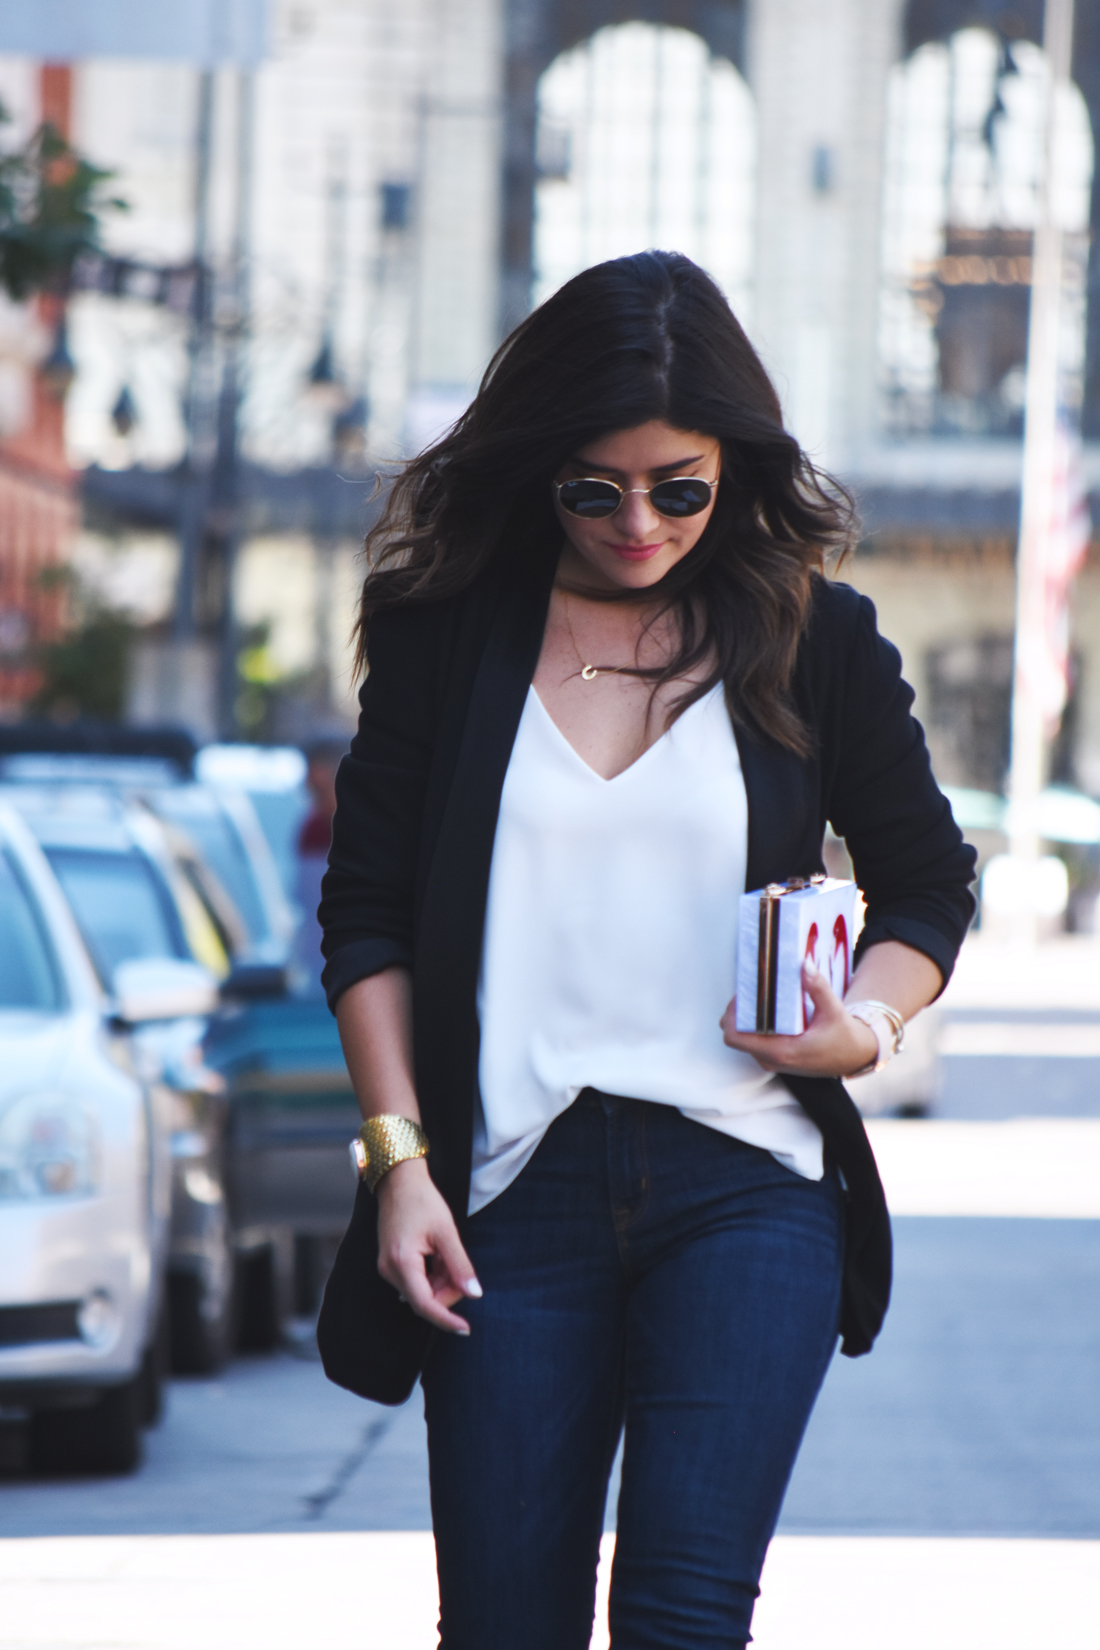 Carolina Hellal of Chic Talk wearing Rayban Rounded sunglasses, an H&M black blazer, a white Topshop top, Public Desire black sandals, and Old Navy jeans. - MY GO-TO CASUAL OUTFIT by popular Denver fashion blogger Chic Talk